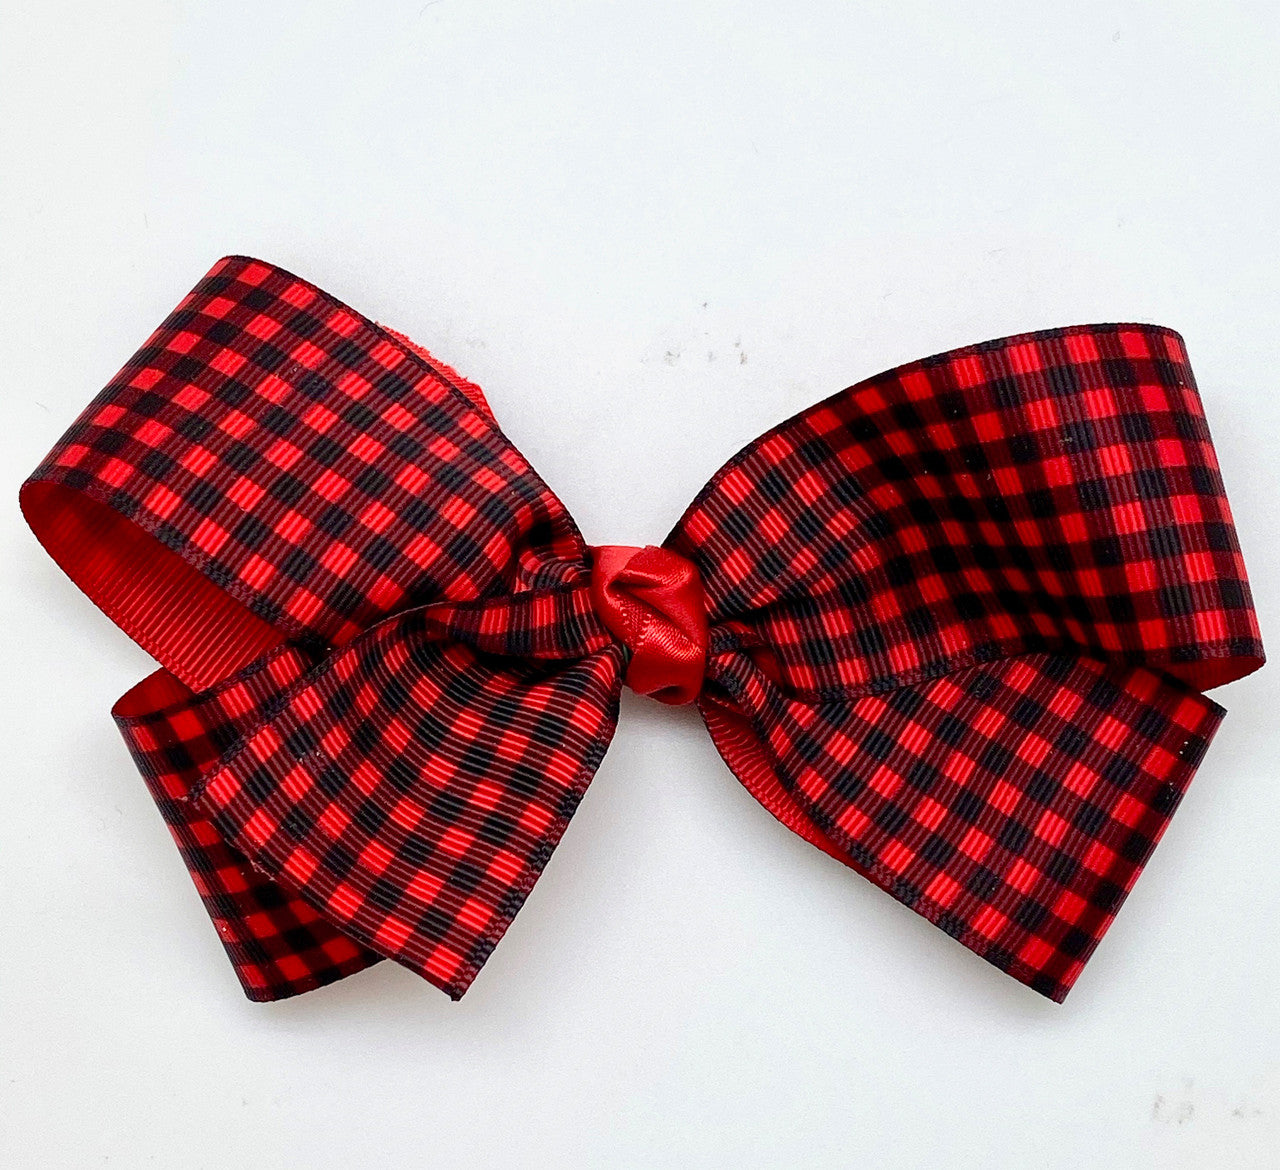 Our 1.5" grosgrain in buffalo plaid makes a perfect hair bow! Wouldn't this be such a fun Winter accessory for any little girl?